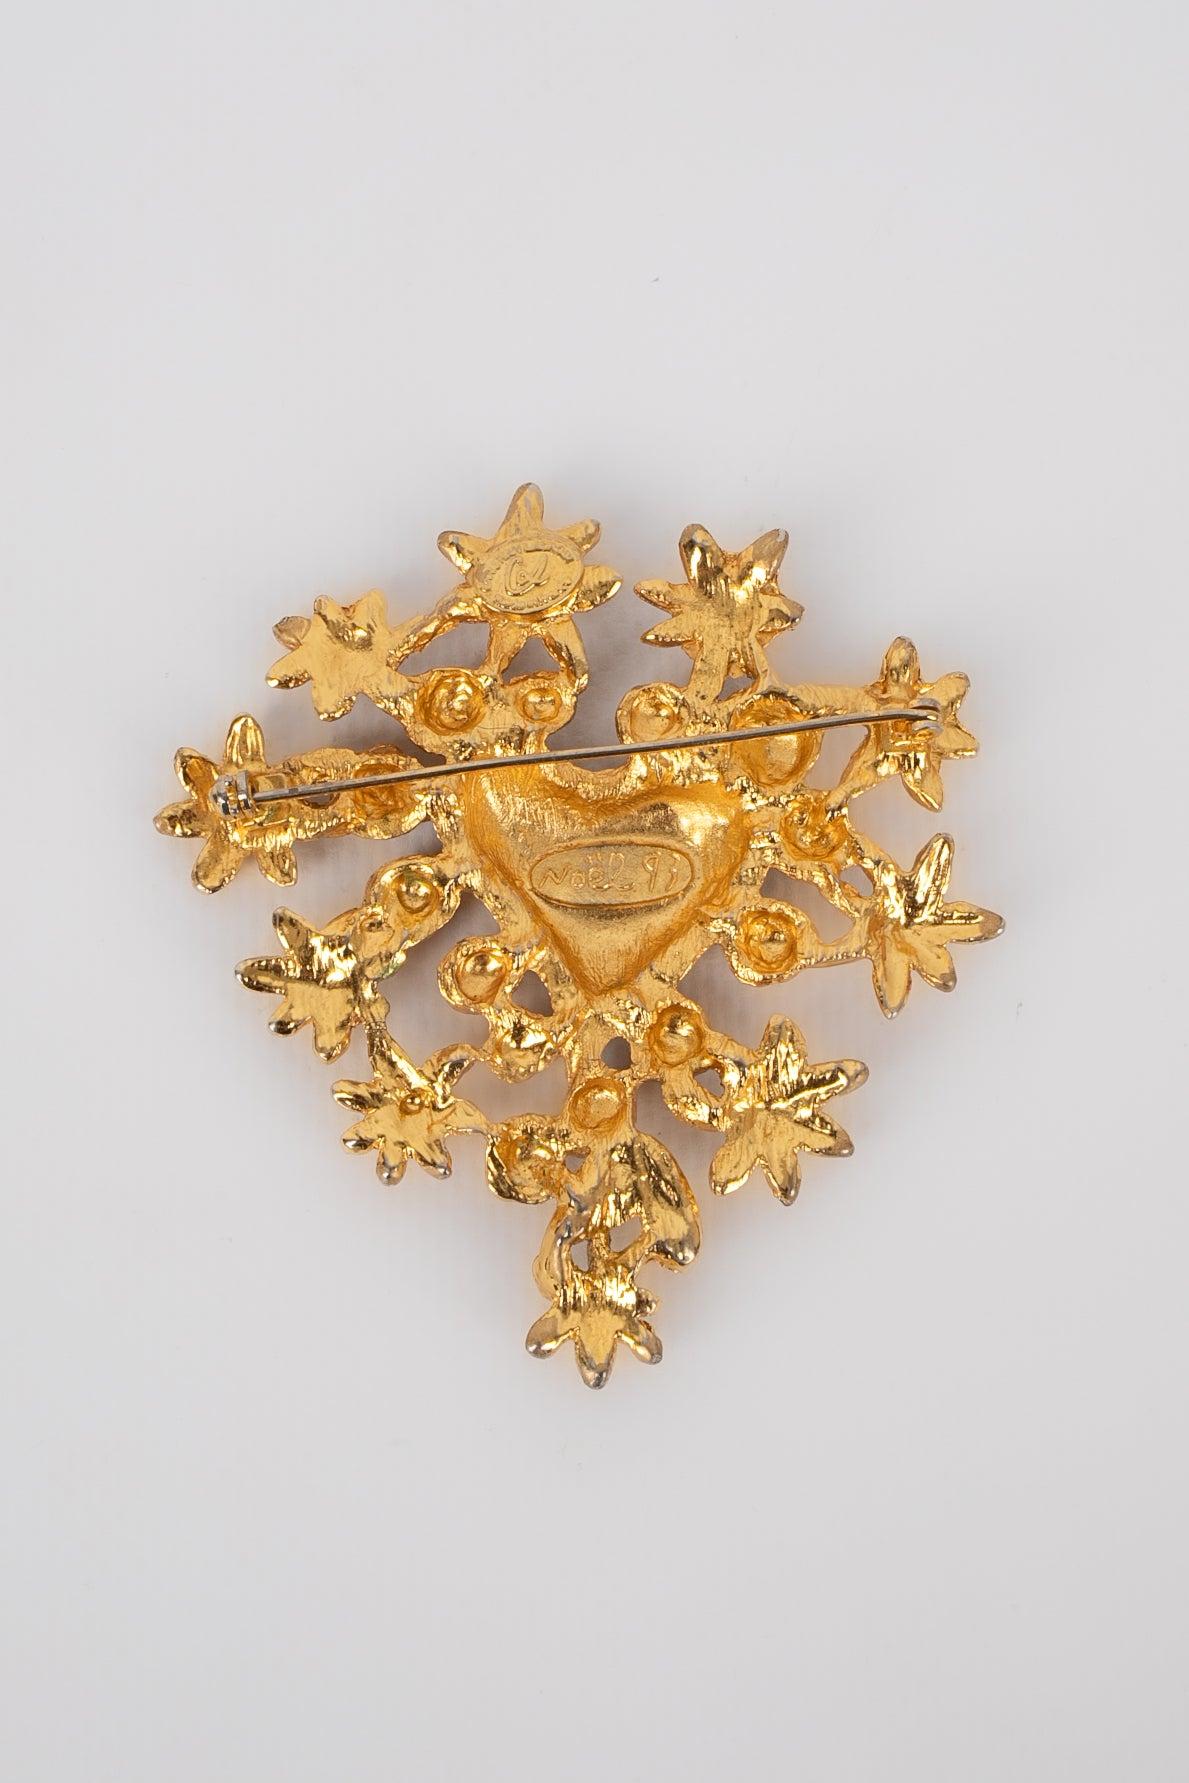 Christian Lacroix - (Made in France) Golden metal brooch representing a heart. Jewelry from the 1993 collection.
 
 Additional information: 
 Condition: Very good condition
 Dimensions: 7 cm x 8 cm
 Period: 20th Century
 
 Seller Reference: BR120
